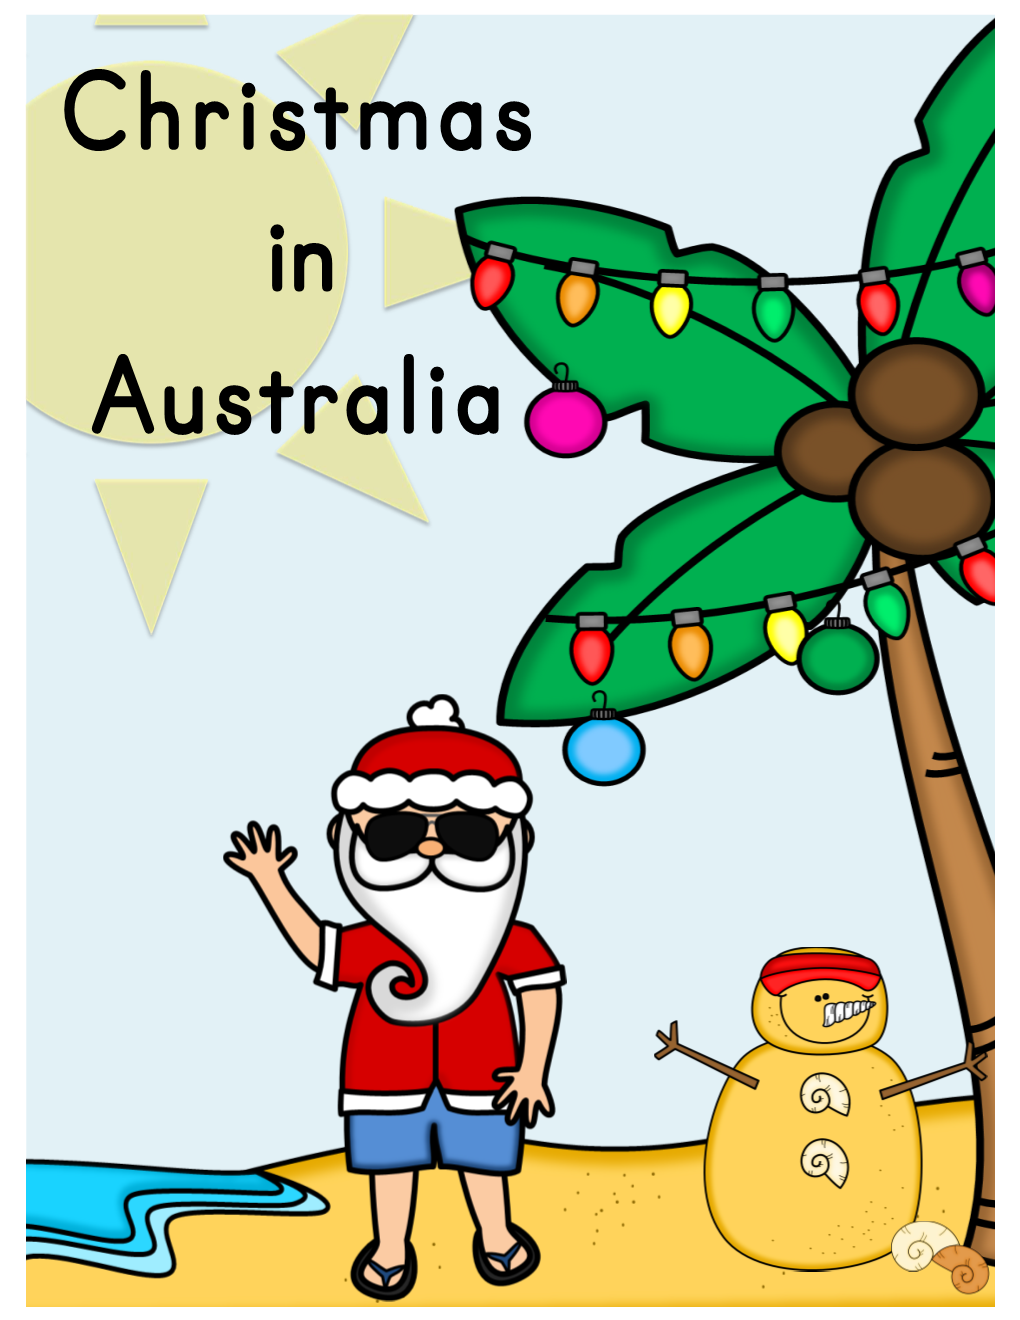 Christmas in Australia © 2017 Stacey Jones at Simple Living